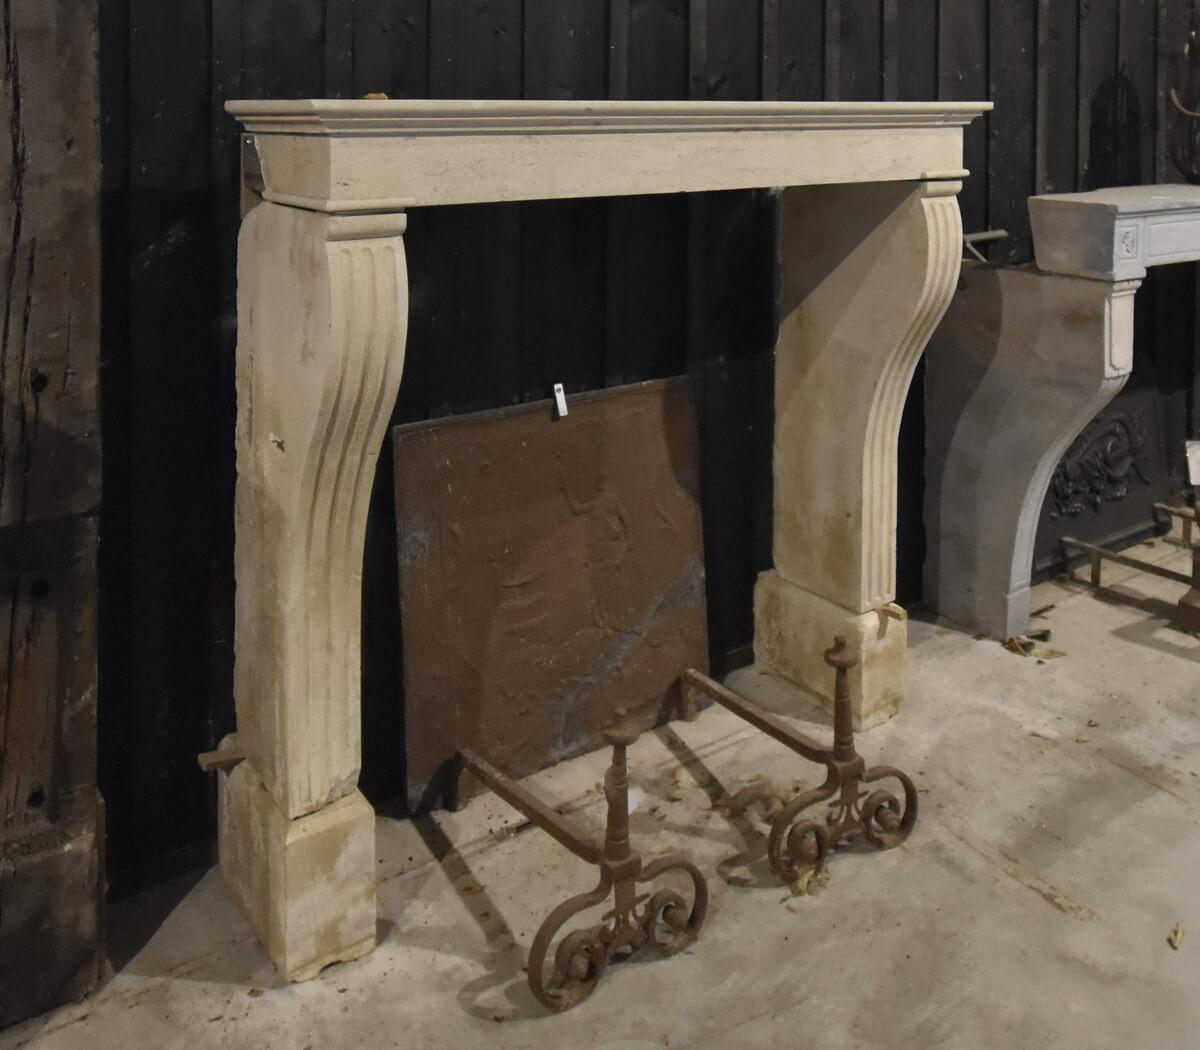 Marble stone fireplace mantel from the 19th Century to place
around the chimney.